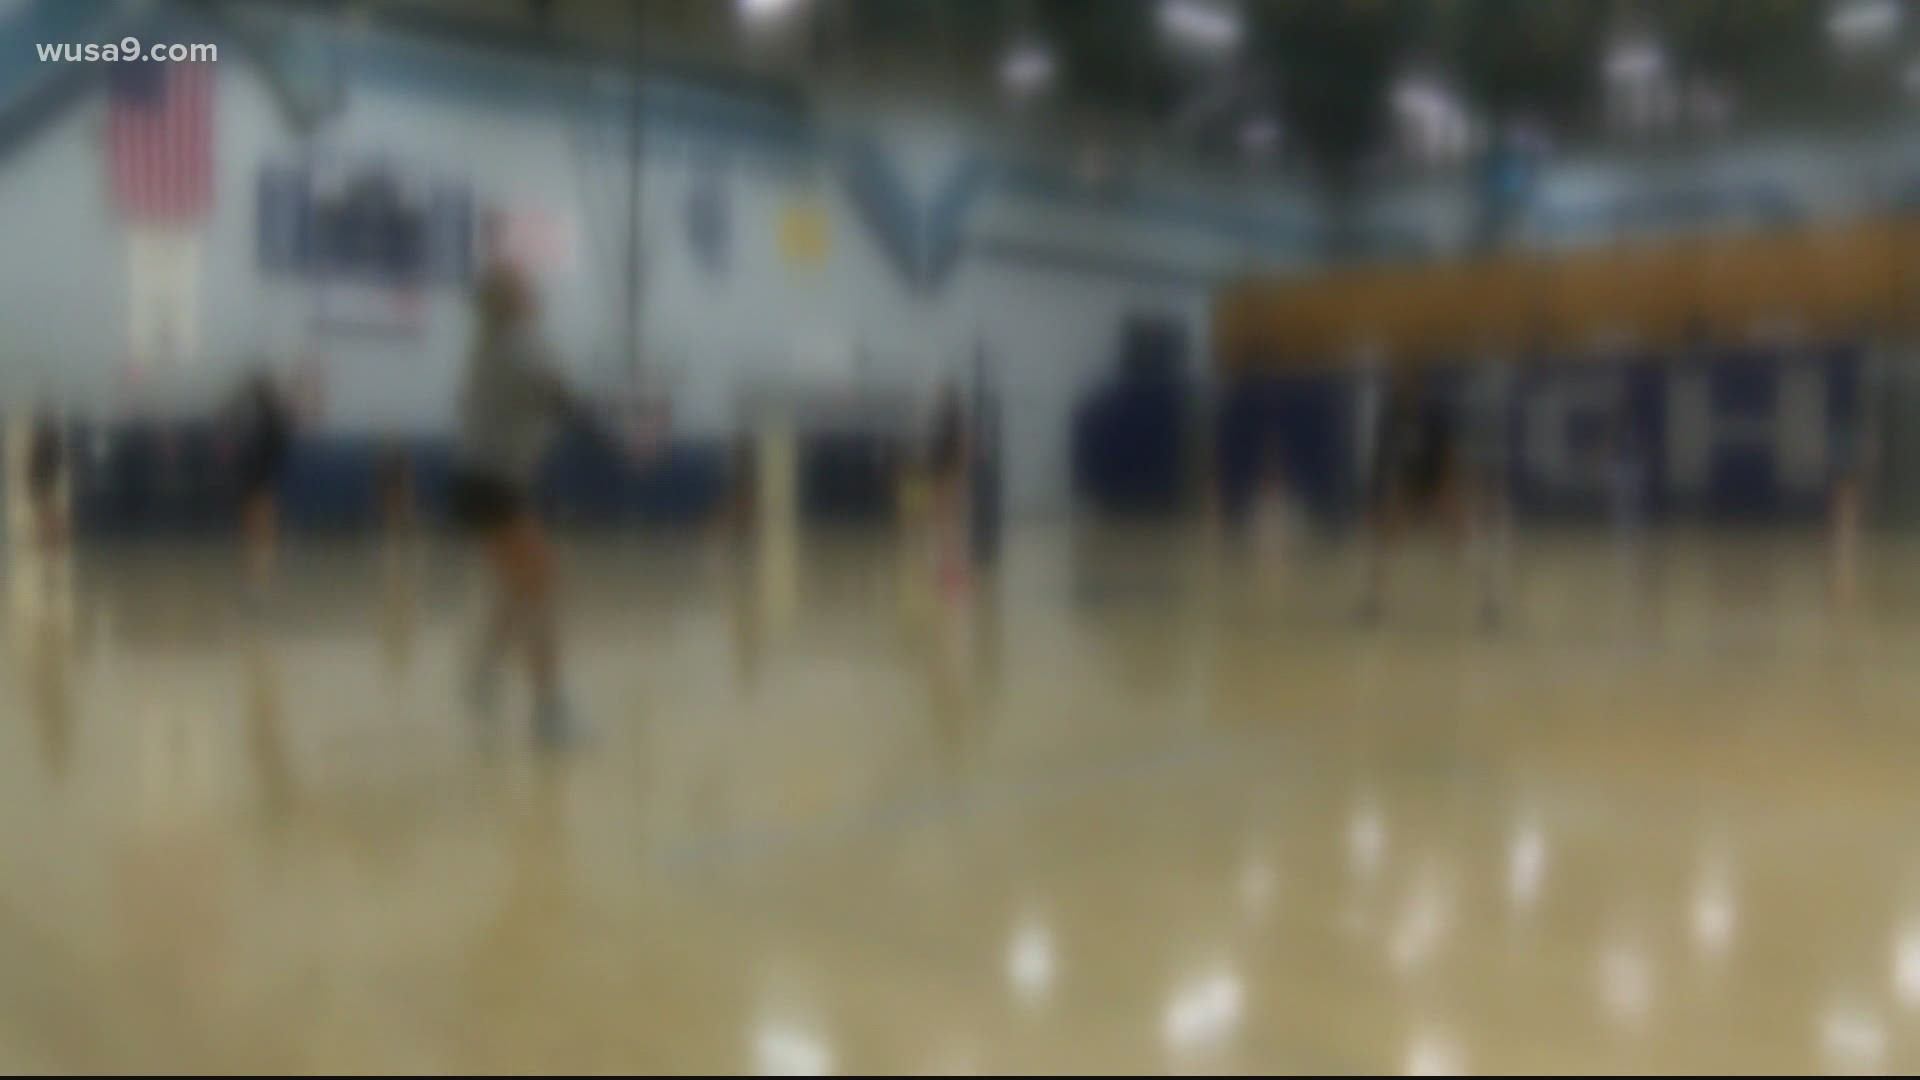 West Virginia leaders spoke to WUSA9 Thursday about the impact on the state and on teenagers after a ban on transgender female athletes was signed by the governor.